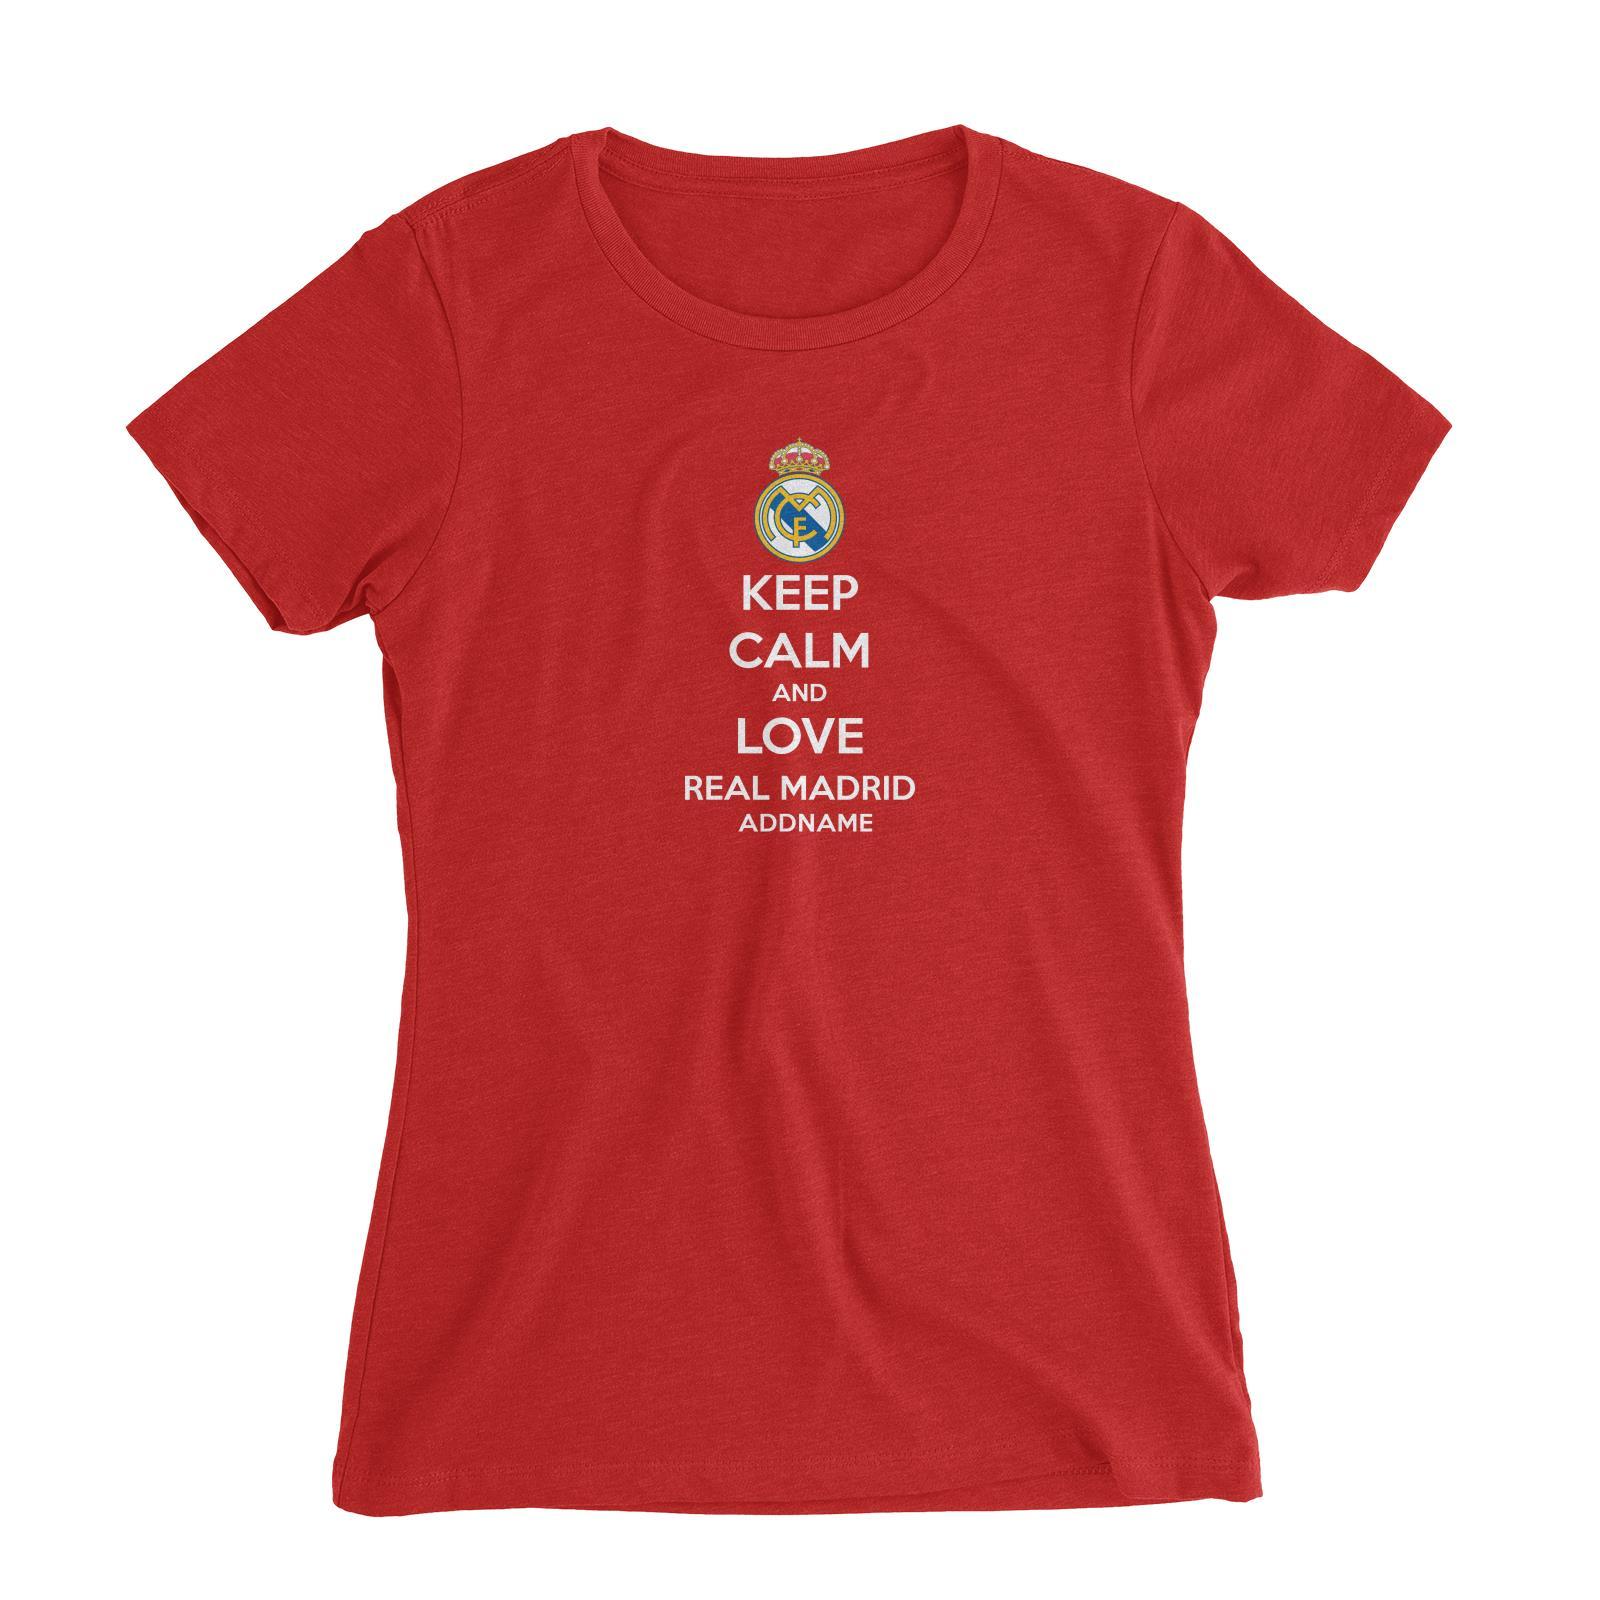 Real Madrid Football Keep Calm And Love Series Addname Women Slim Fit T-Shirt